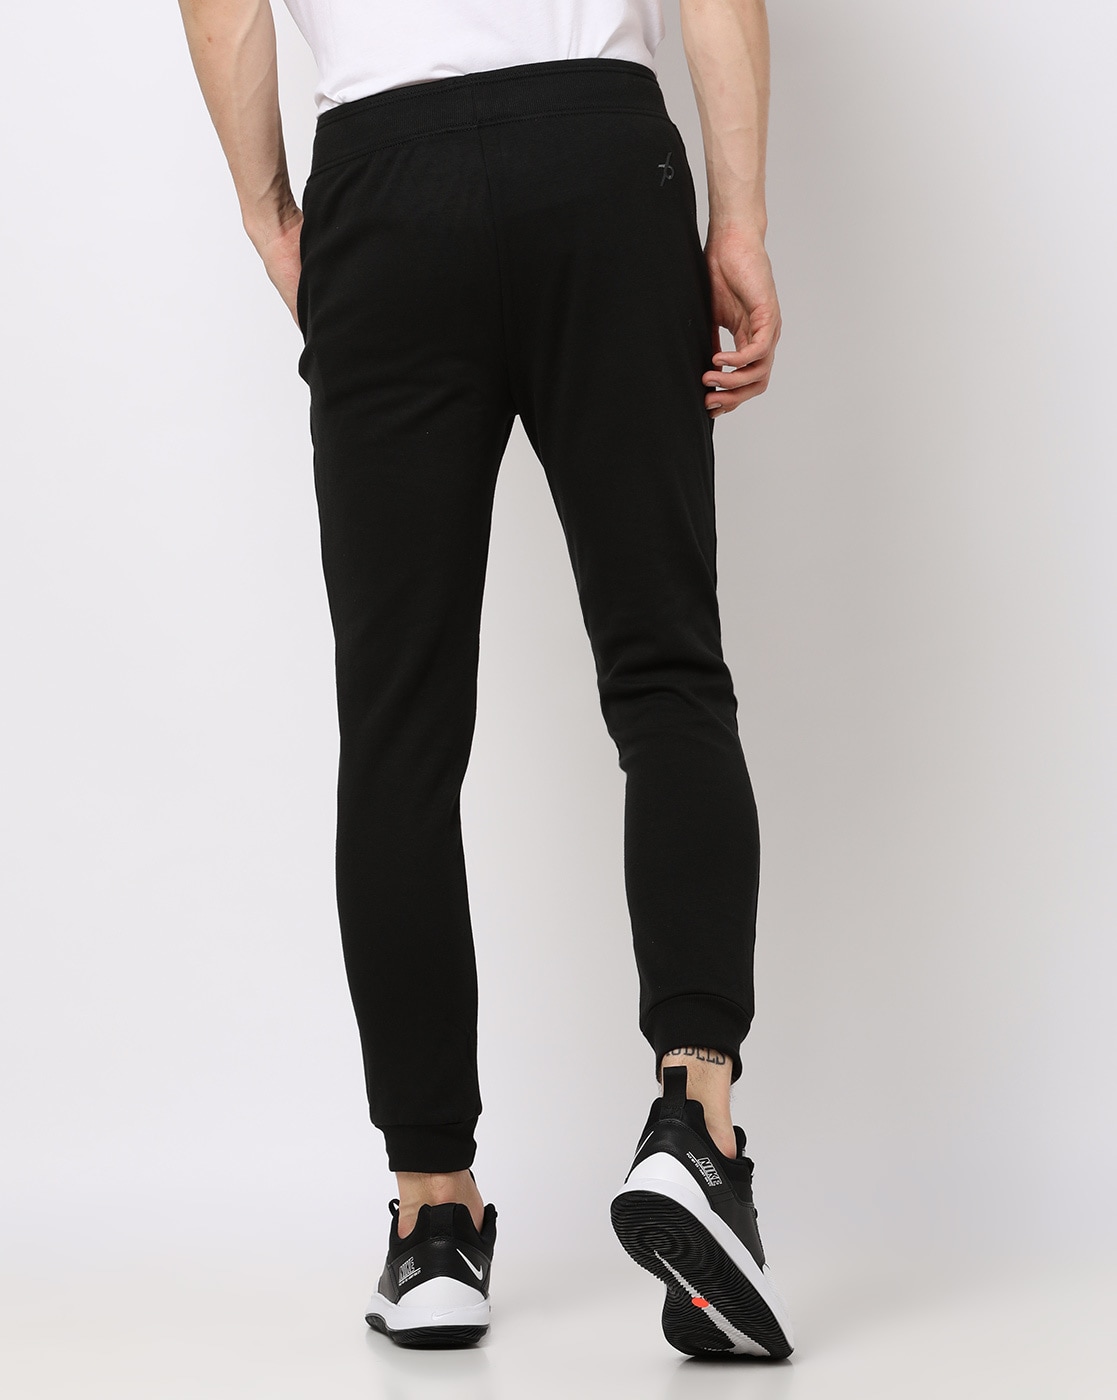 Jockey Womens Cotton Elastane Stretch Slim Fit Track pants  Online  Shopping site in India